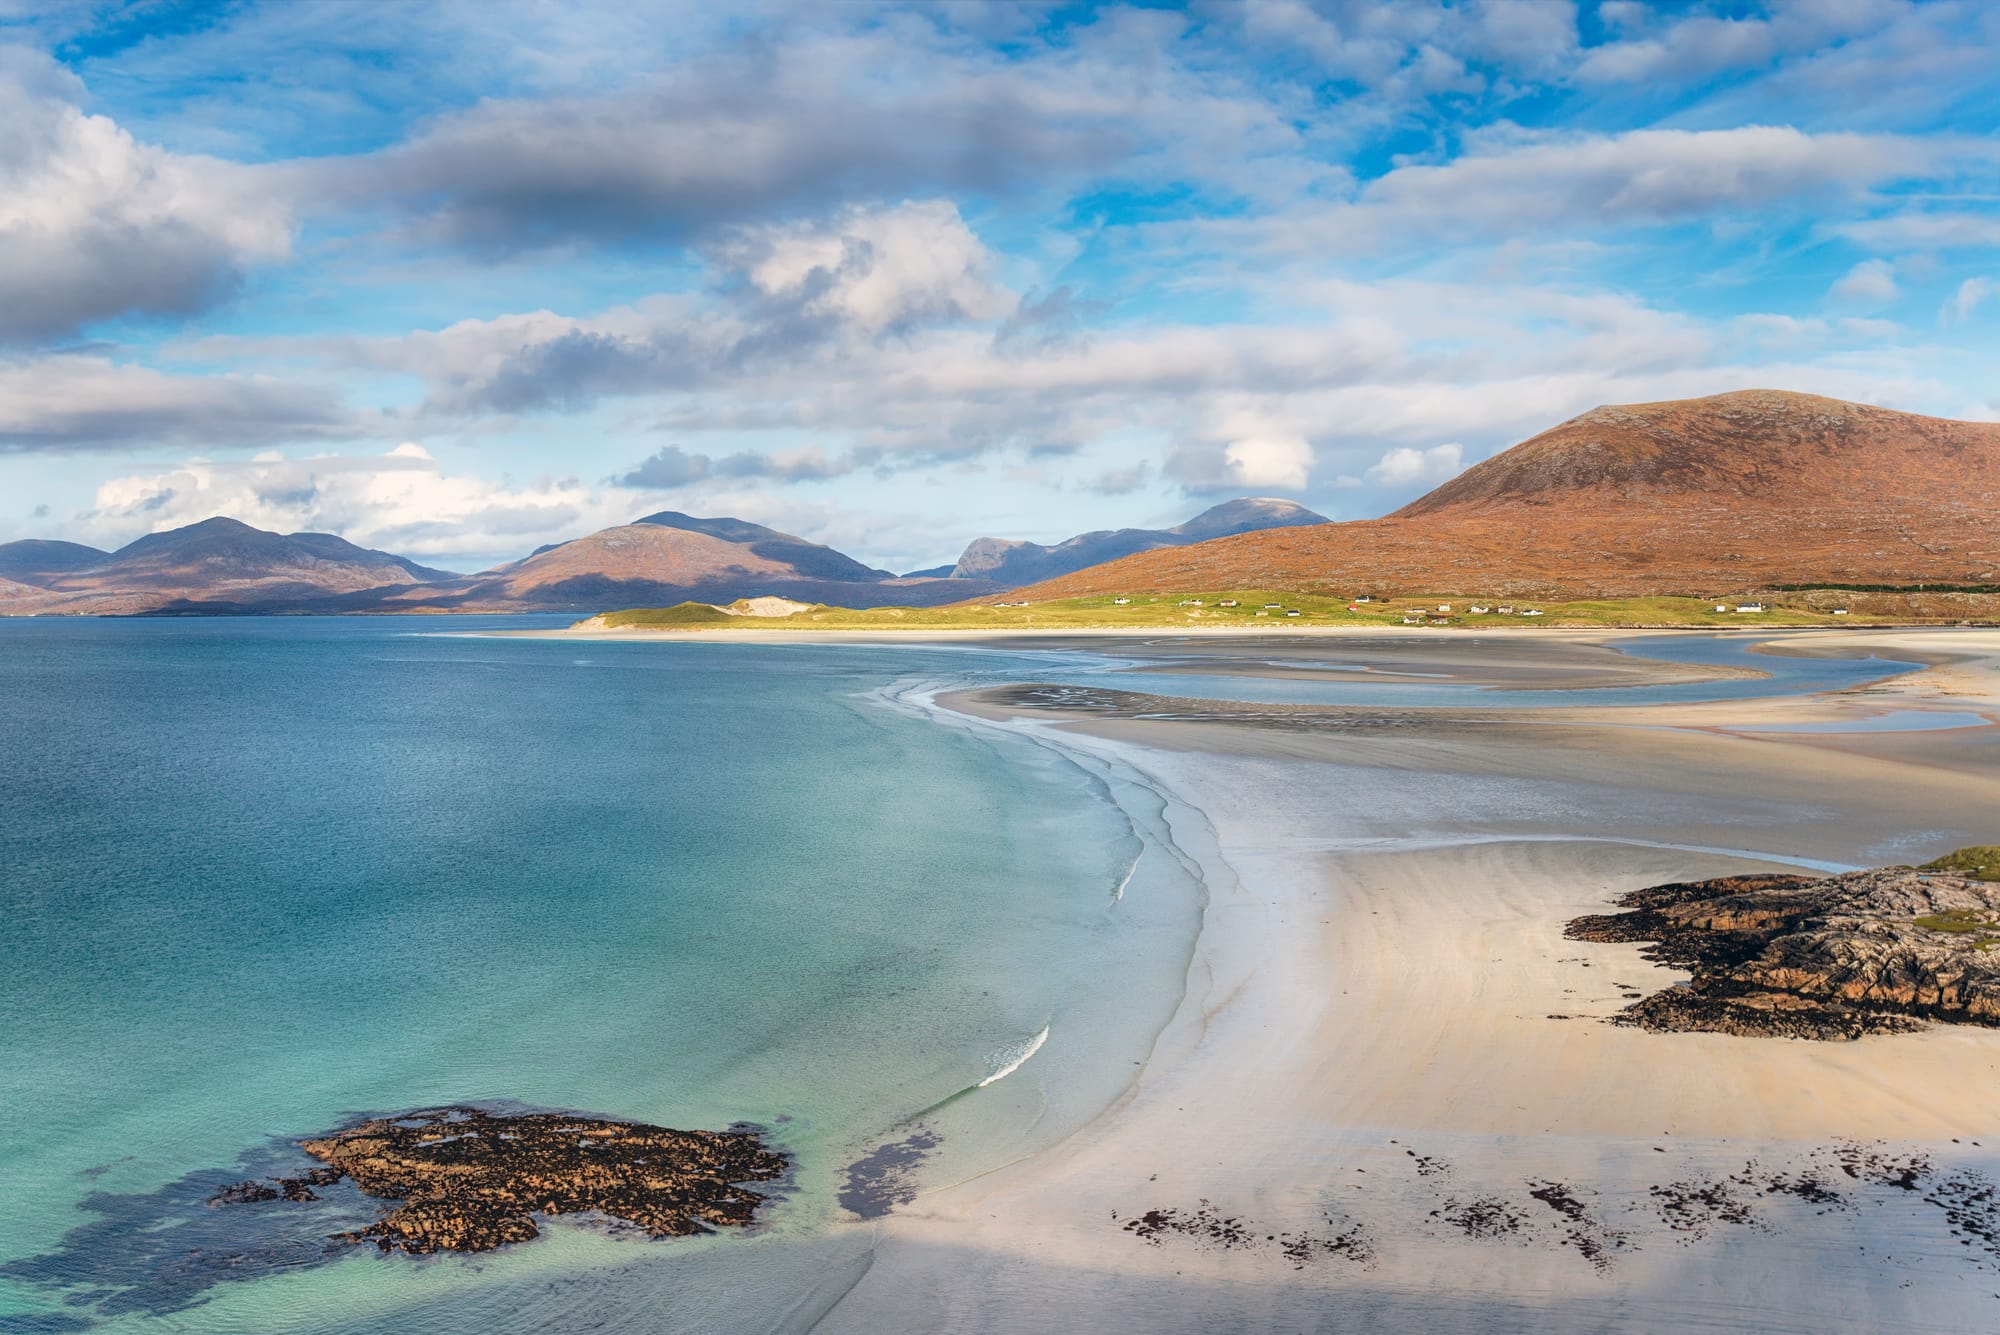 Your Ultimate Guide To Scotland's Best Road Trip, The North Coast 500